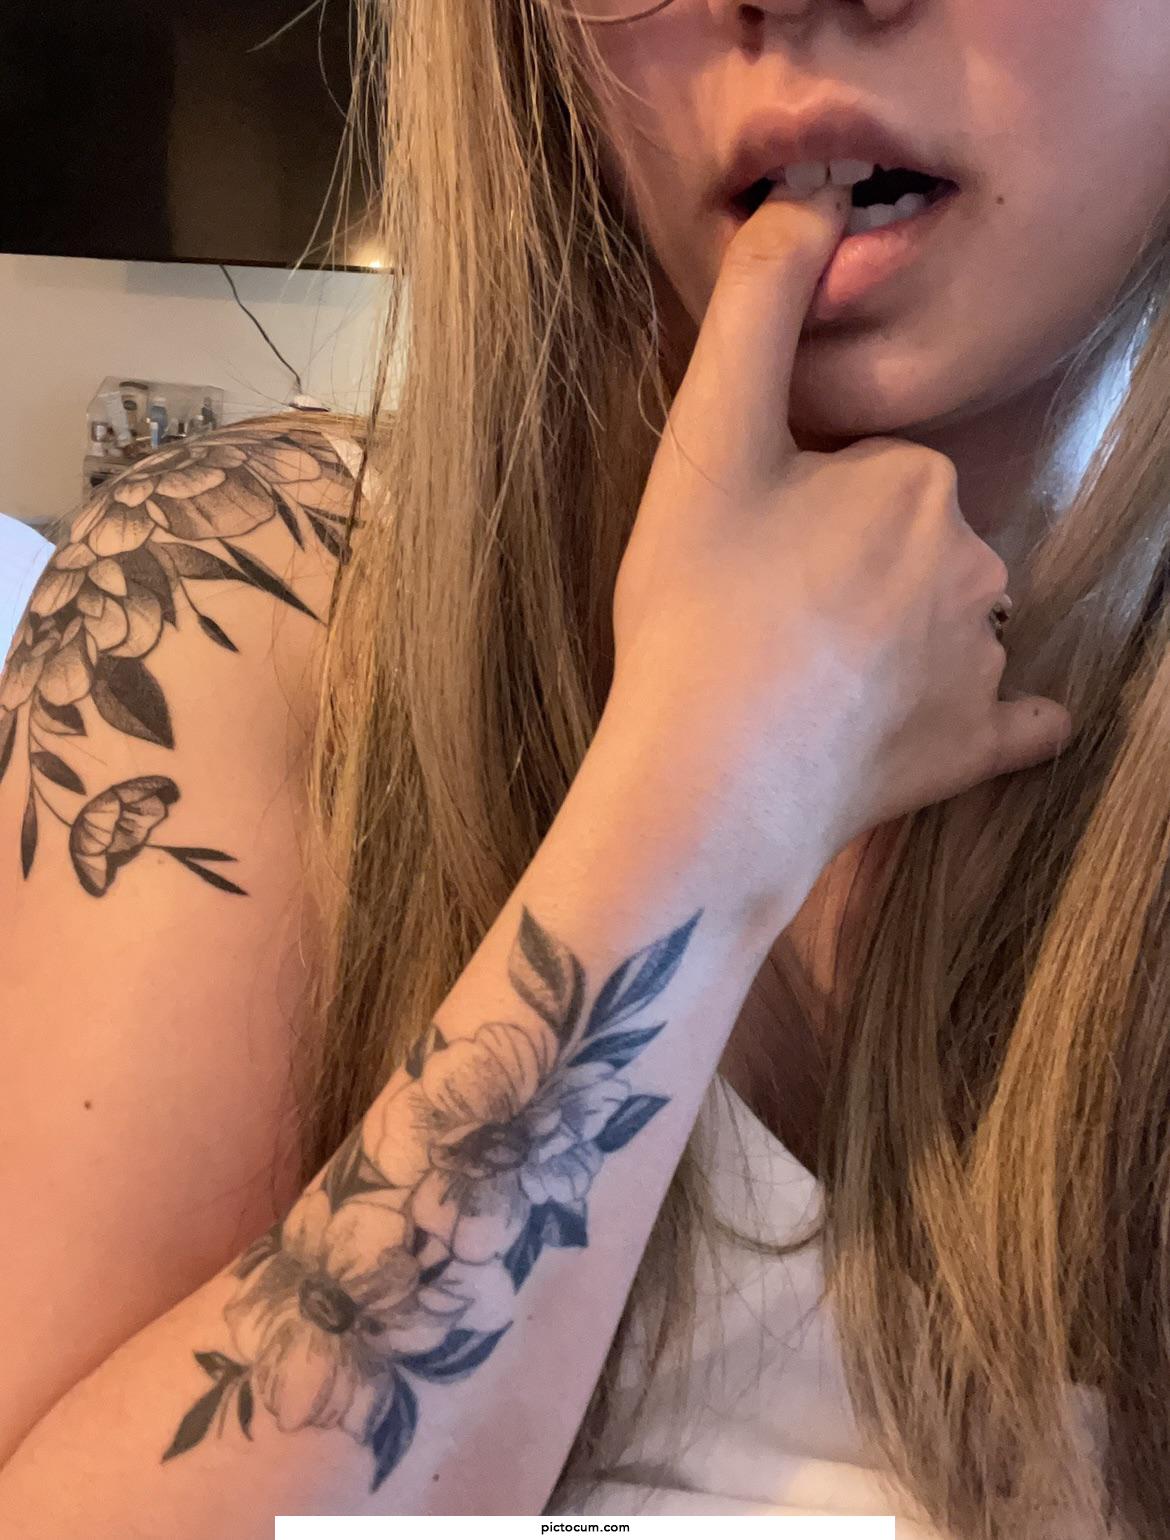 This picture would look better if that was your cock in my mouth